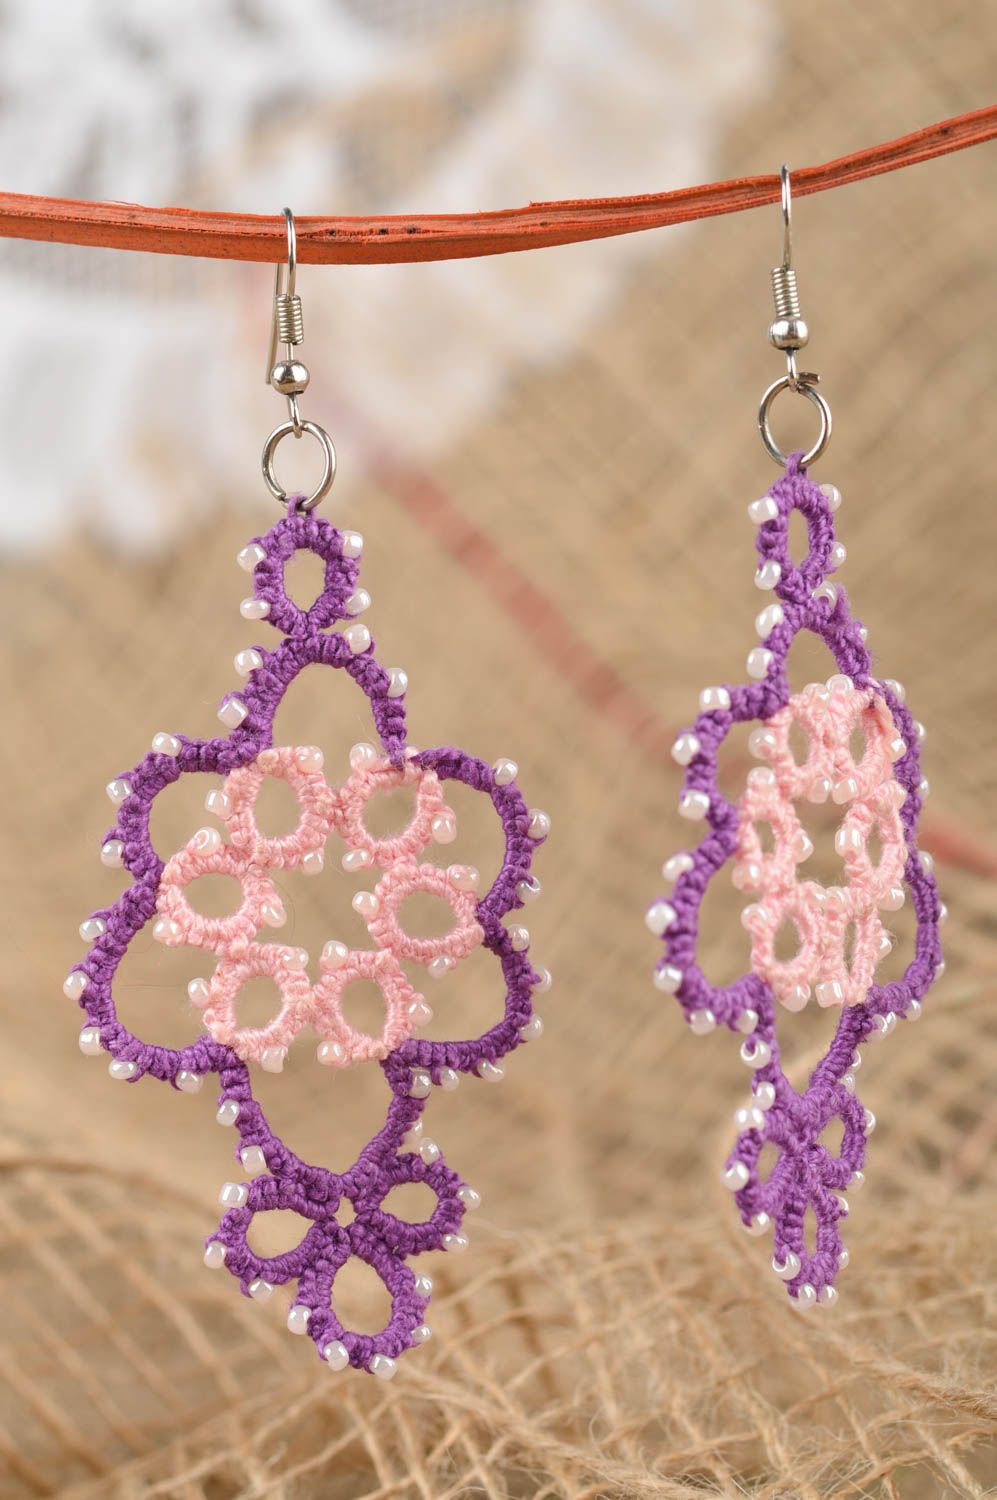 Homemade jewelry lacy earrings designer accessories earrings for women photo 1